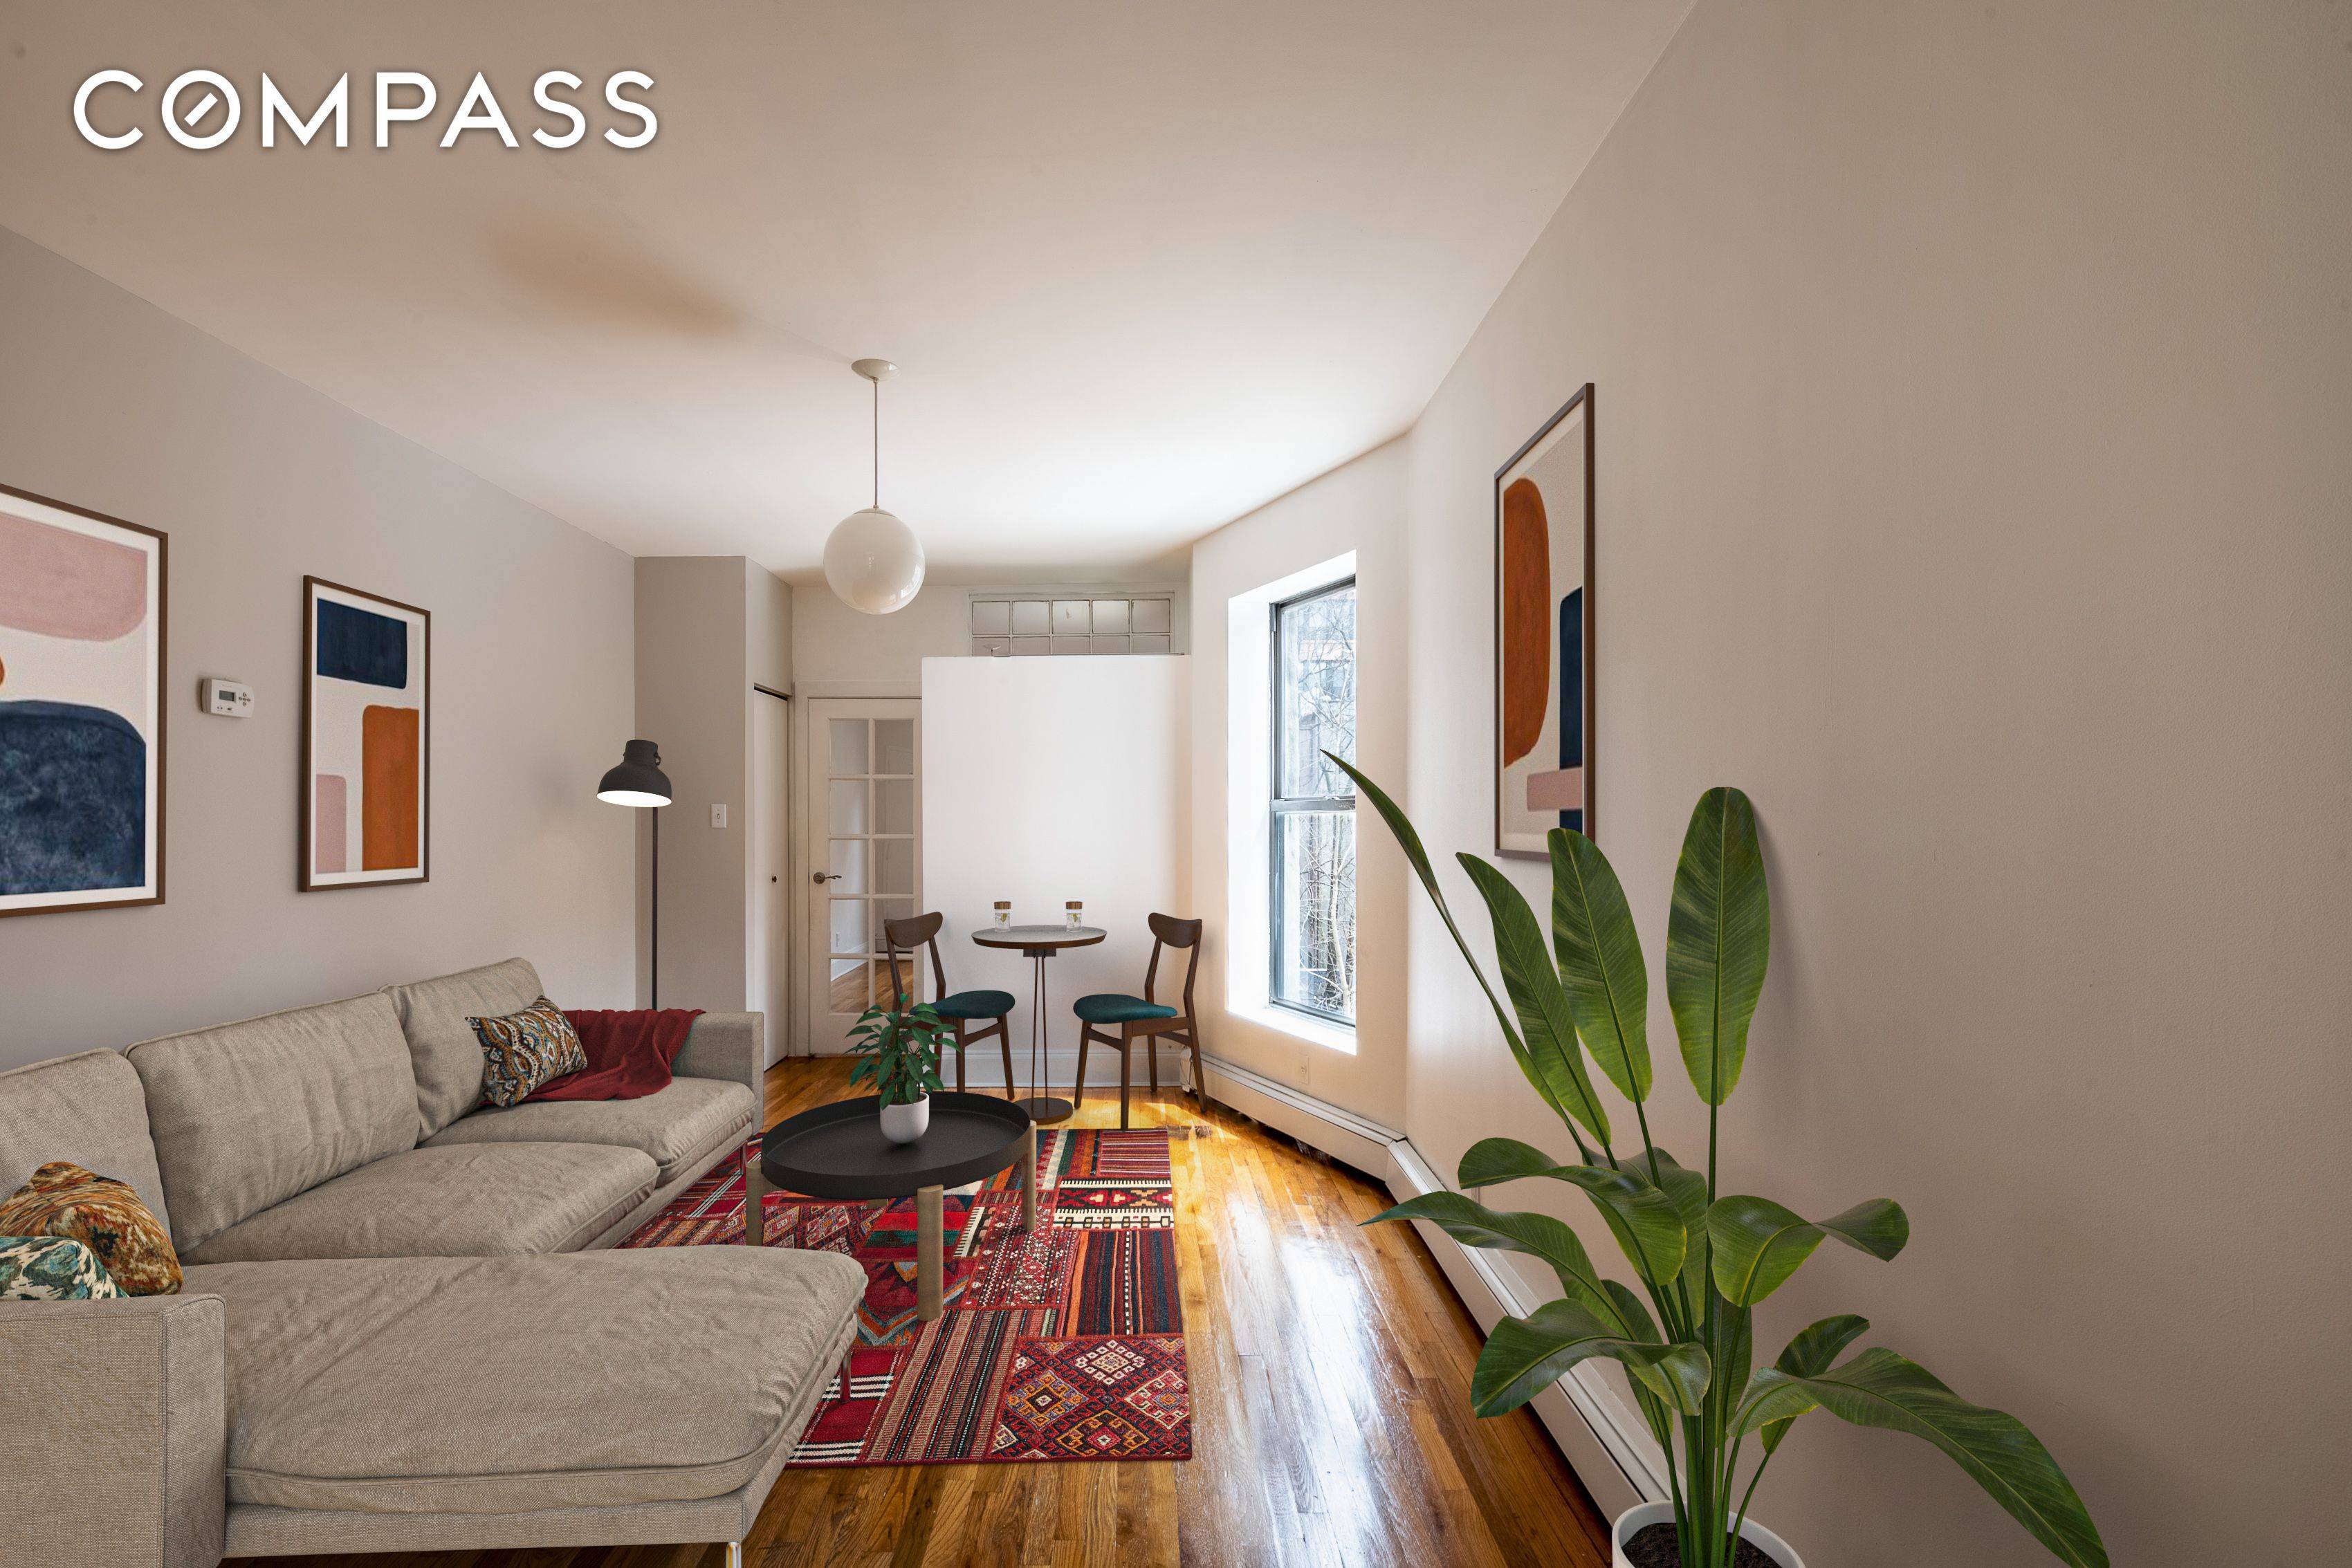 Located on the border of Clinton Hill and Bed Stuy, this two bedroom, cooperative apartment is bathed in natural light from its three exposures South, East and West.